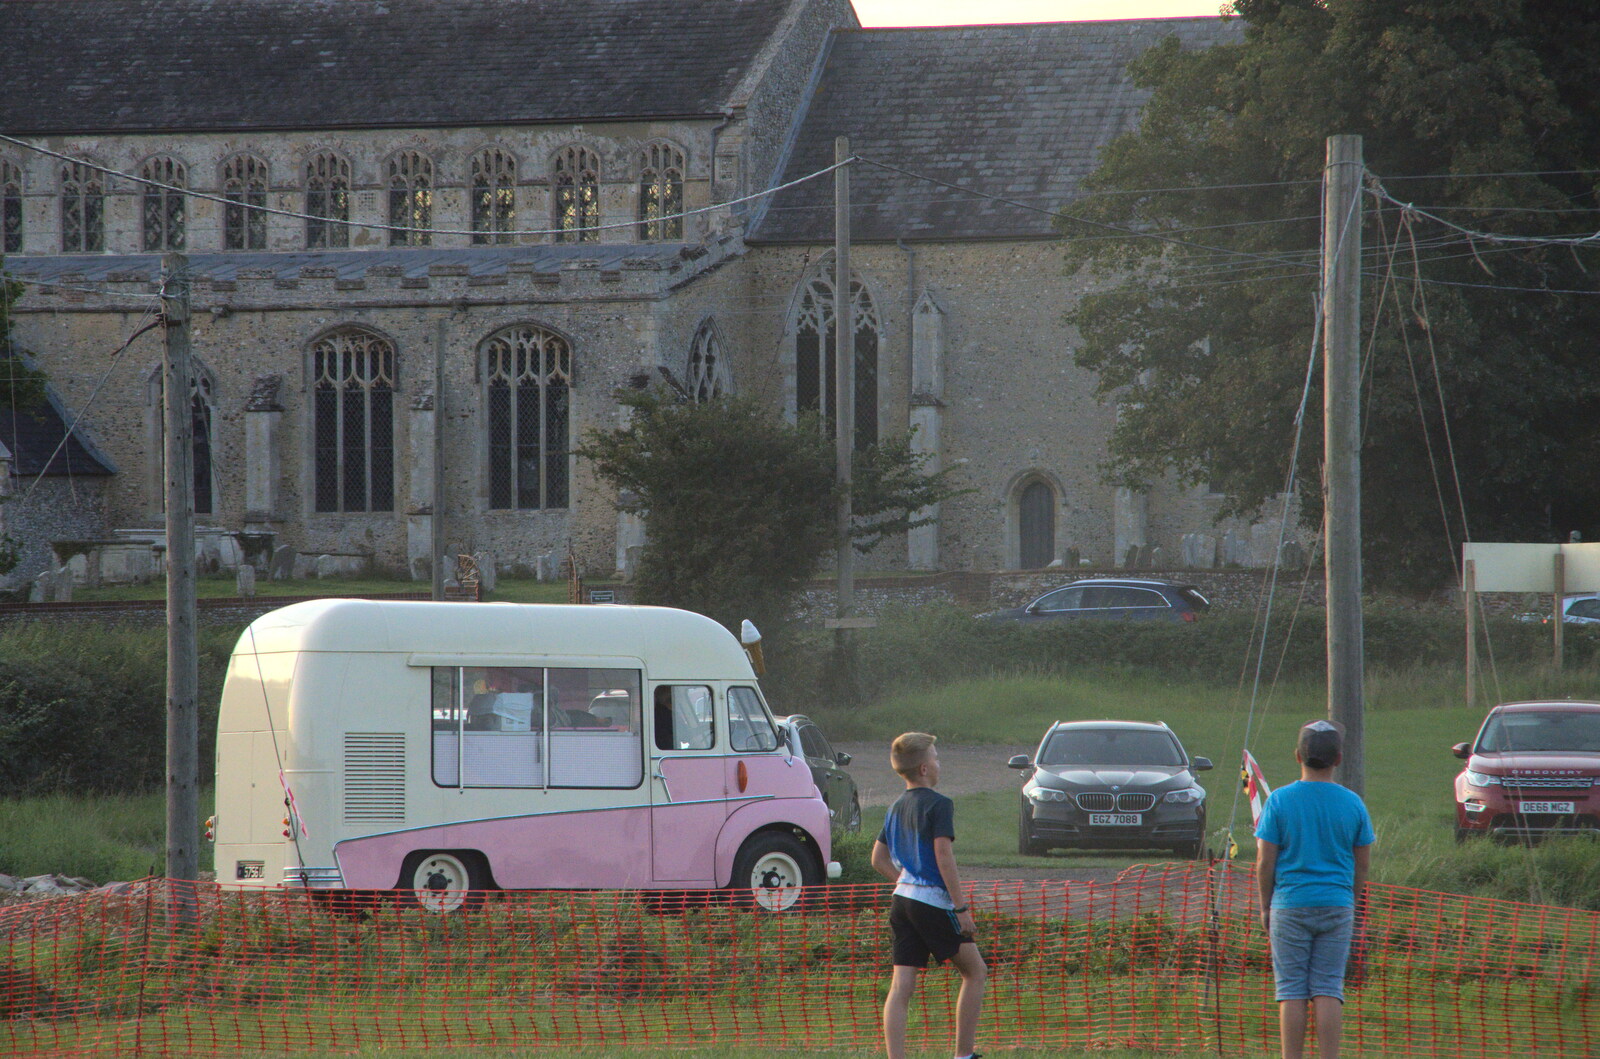 The 50s ice-cream van drives off from Star Wing's Hops and Hogs Festival, Redgrave, Suffolk - 12th September 2020